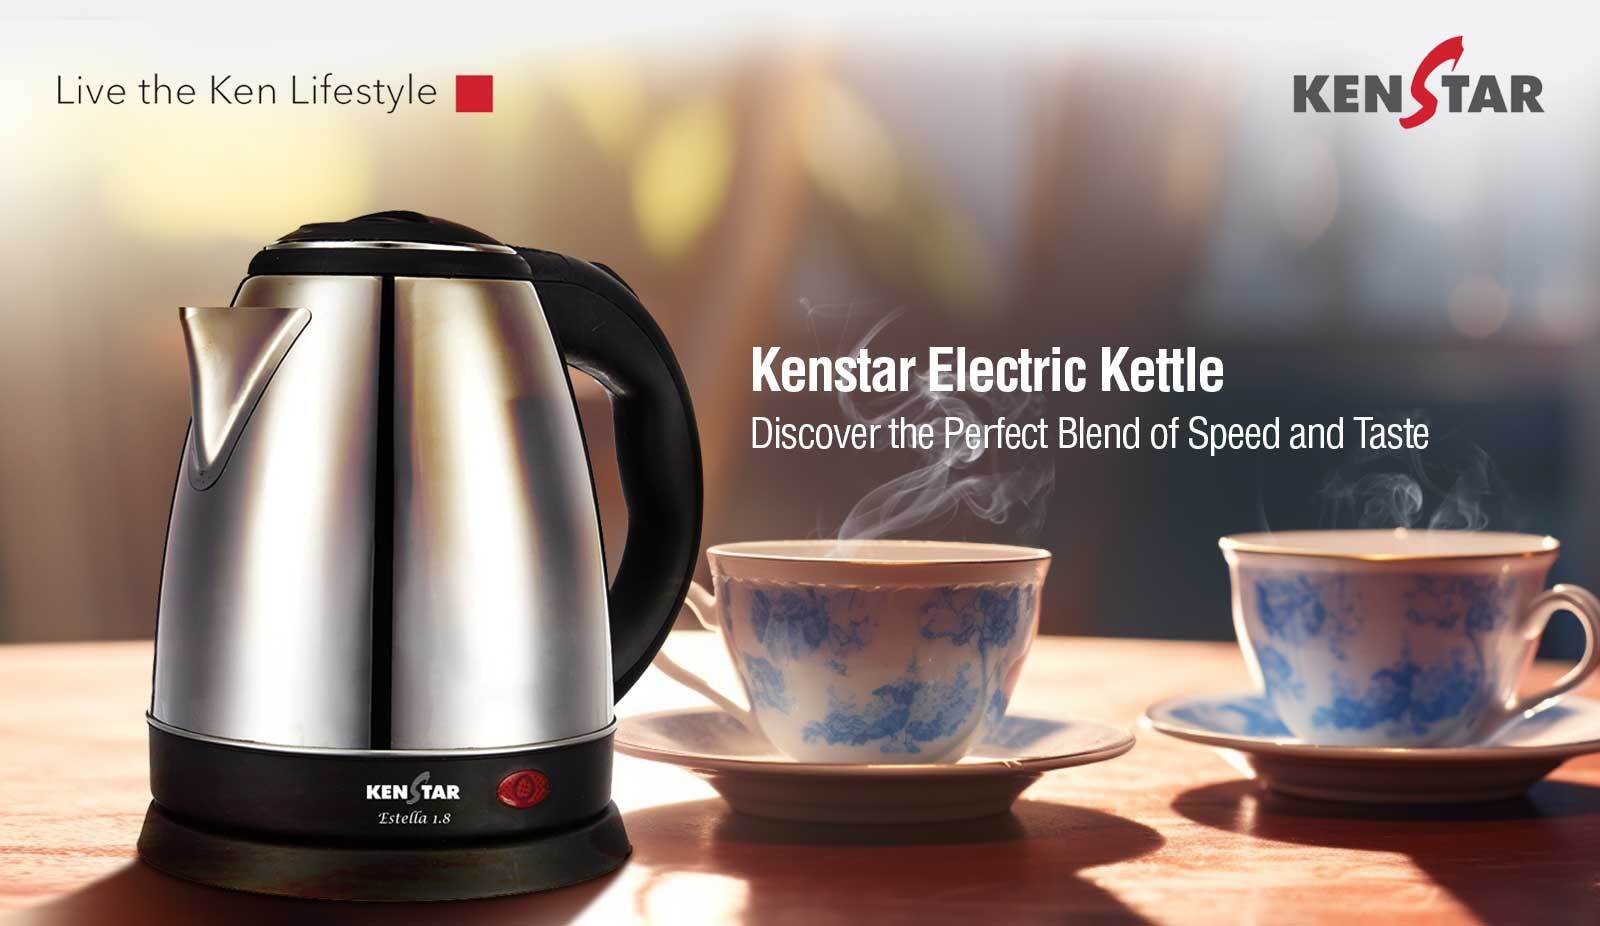 THE ELECTRIC KETTLE: A MODERN MARVEL FOR QUICK AND CONVENIENT BREWING